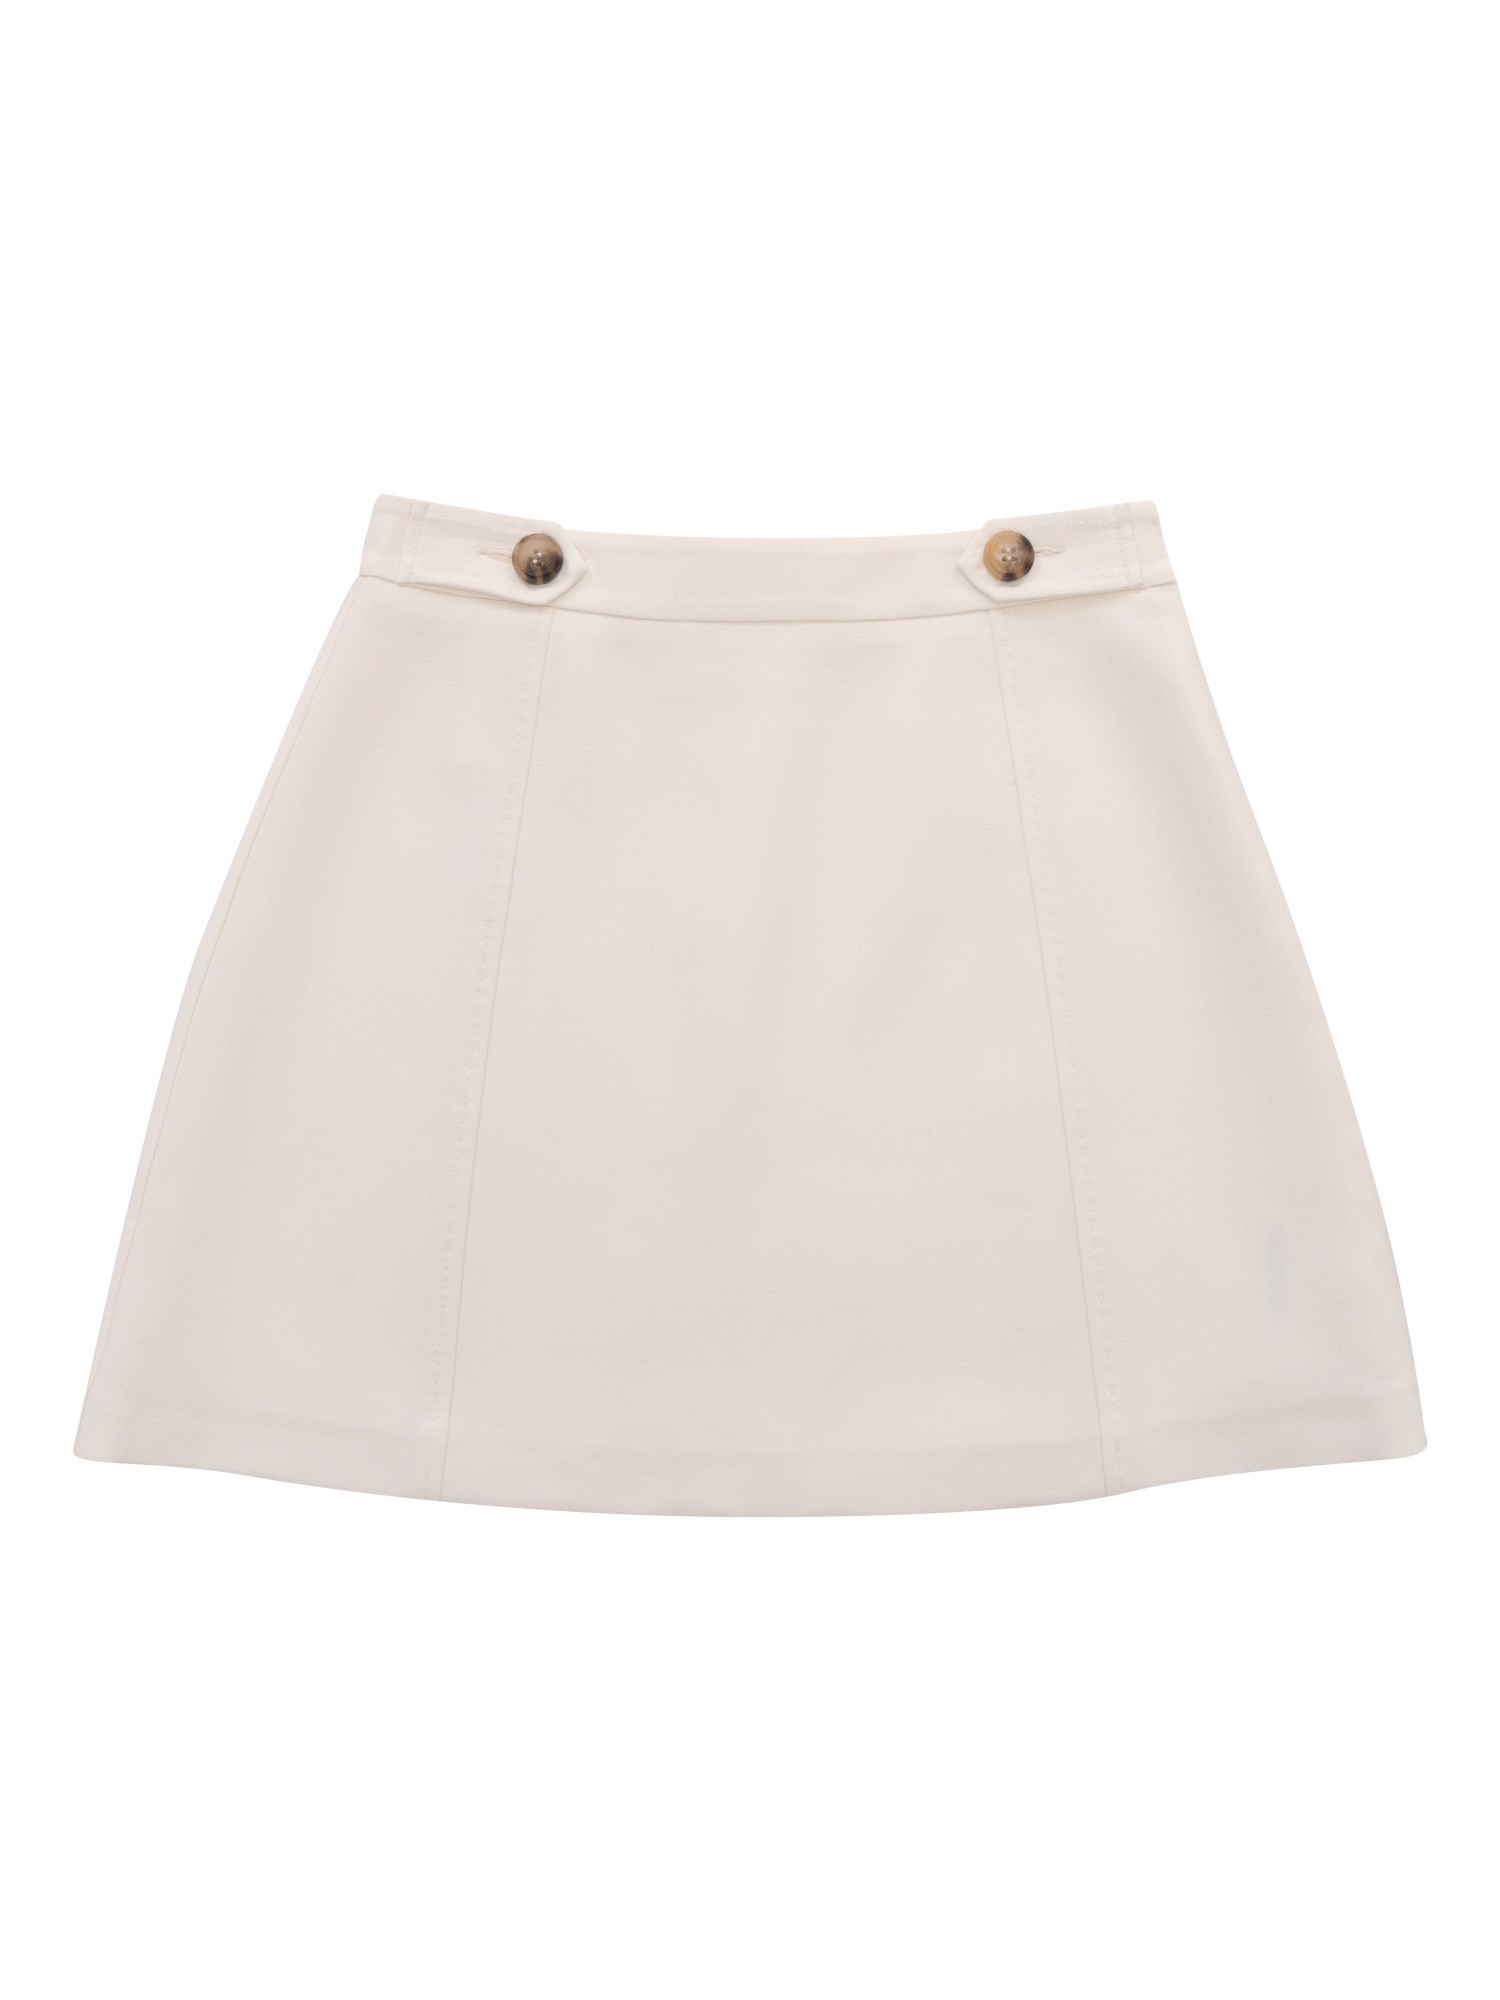 Max & Co White Mini Skirt In Pink